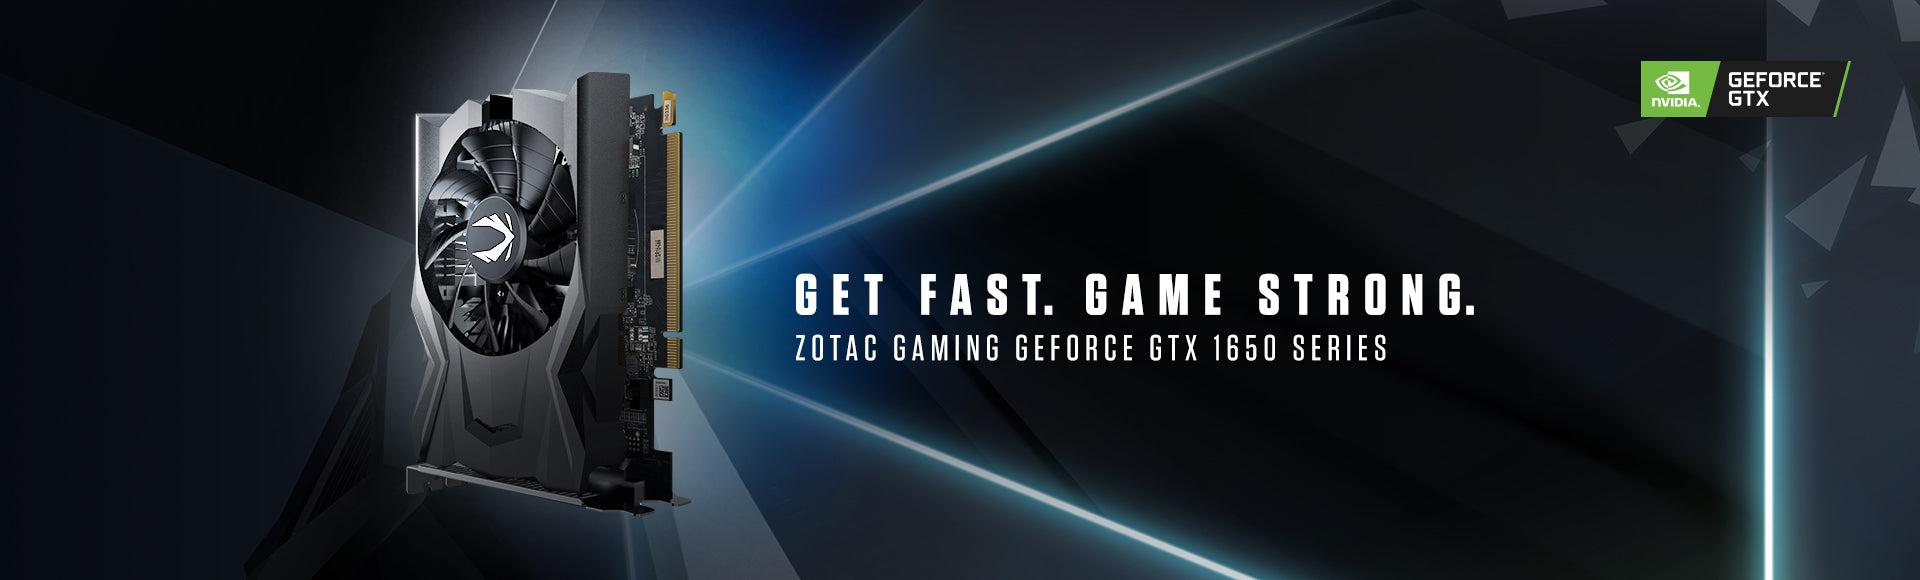 ZOTAC Nvidia GeForce GTX 1650 graphic card Turing Architecture launch India